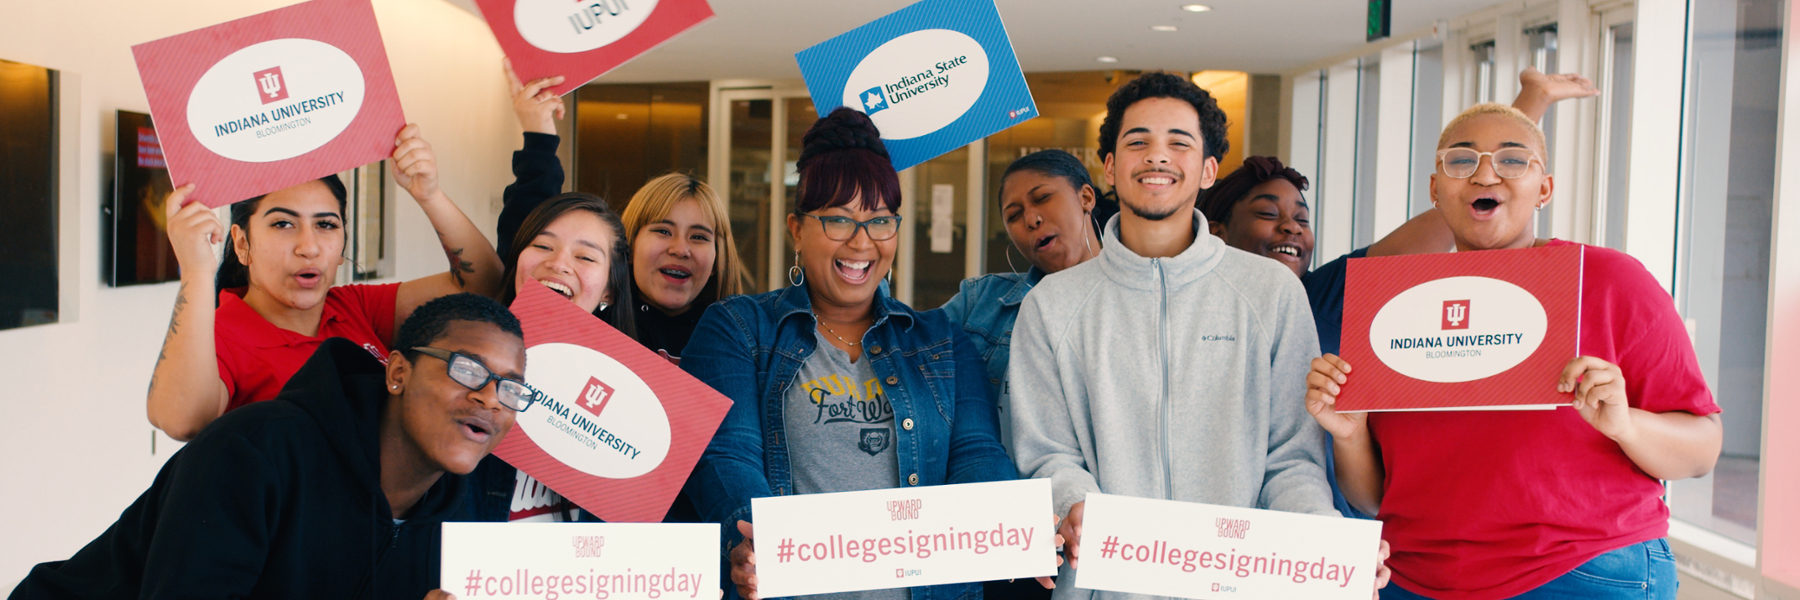 Students posing at College Signing Day while holding signs from various universities.